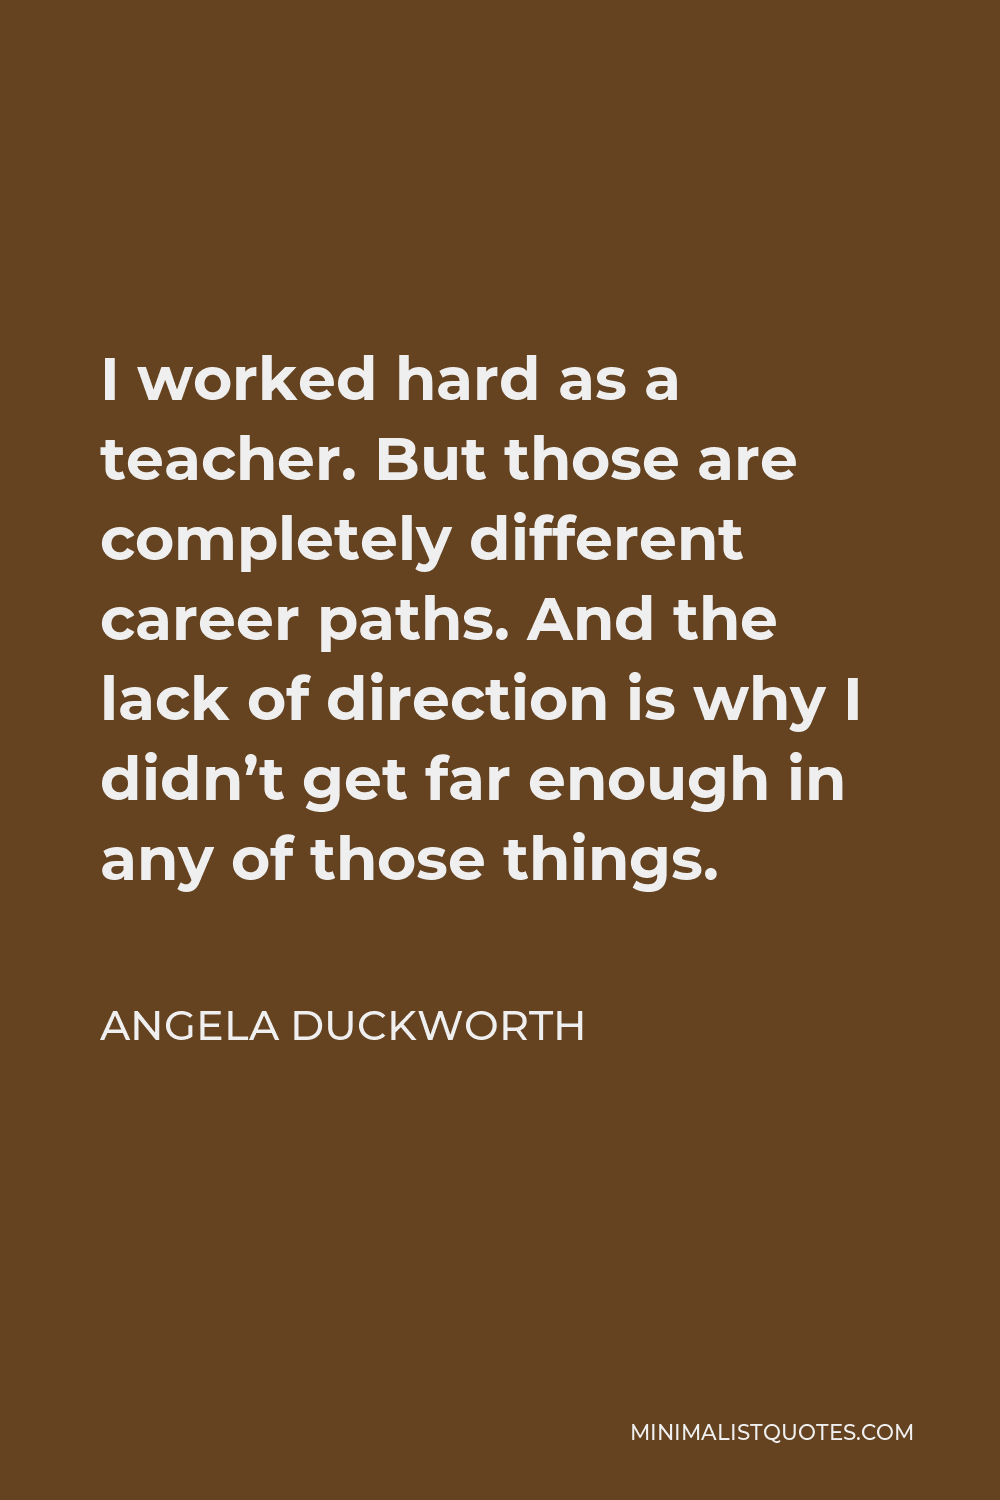 Angela Duckworth Quote - I worked hard as a teacher. But those are completely different career paths. And the lack of direction is why I didn’t get far enough in any of those things.